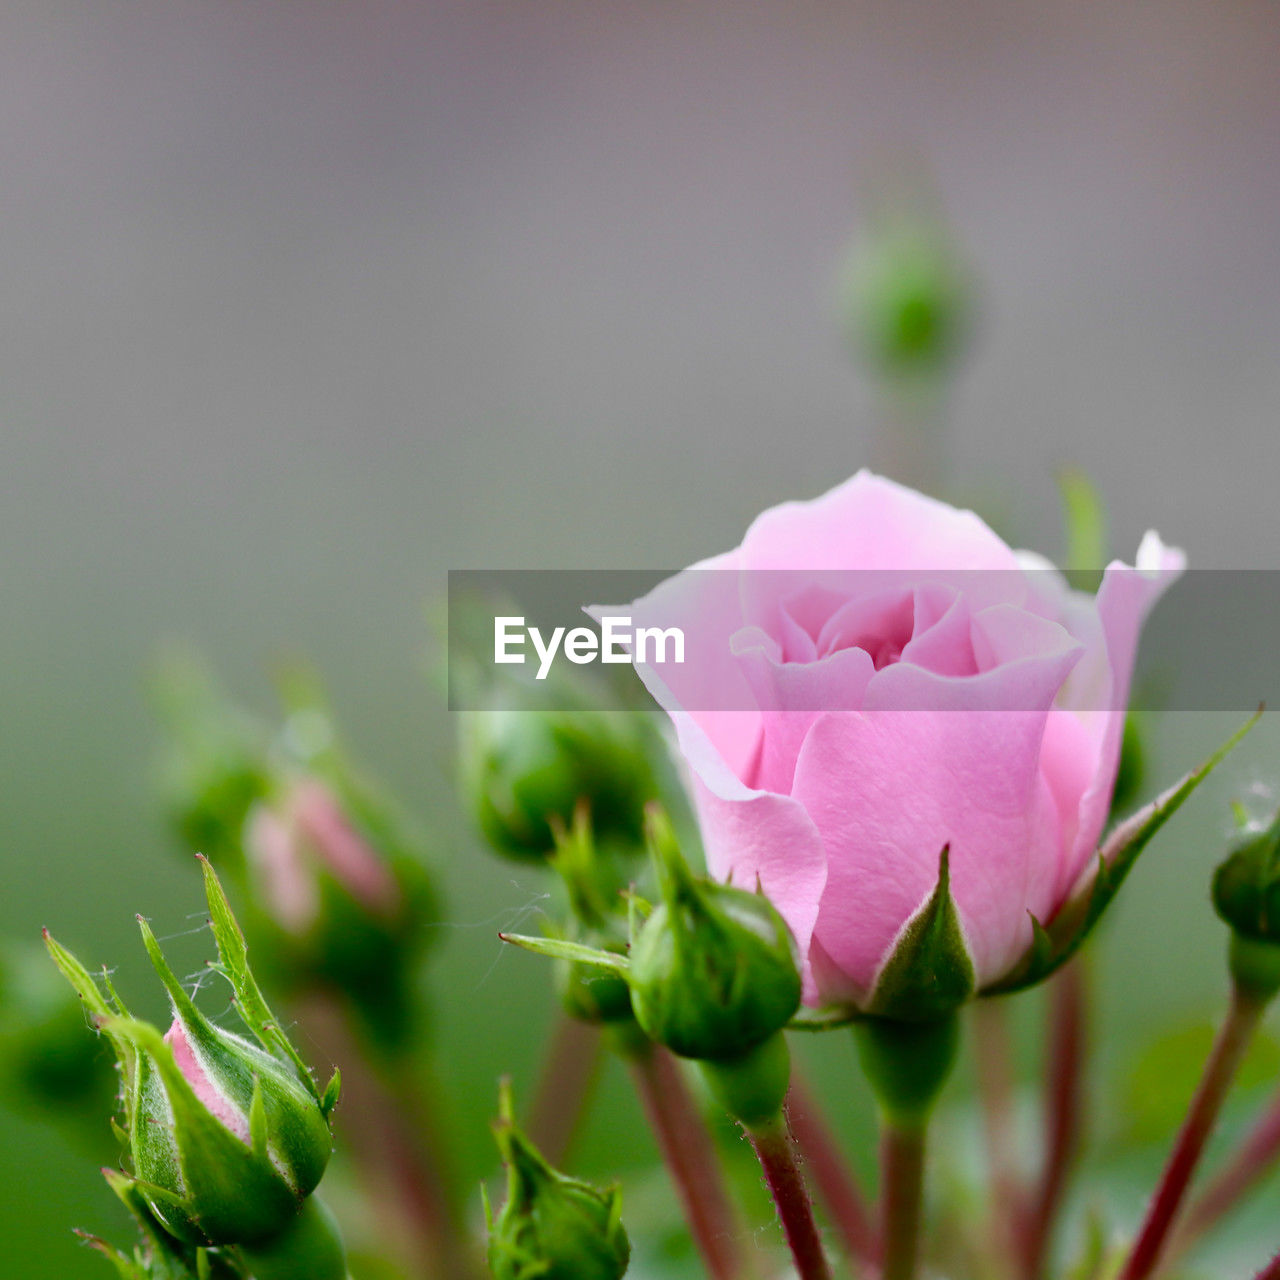 flower, plant, flowering plant, beauty in nature, pink, freshness, nature, macro photography, petal, close-up, rose, leaf, plant part, flower head, inflorescence, fragility, no people, green, blossom, springtime, growth, outdoors, bud, selective focus, focus on foreground, water, copy space, plant stem